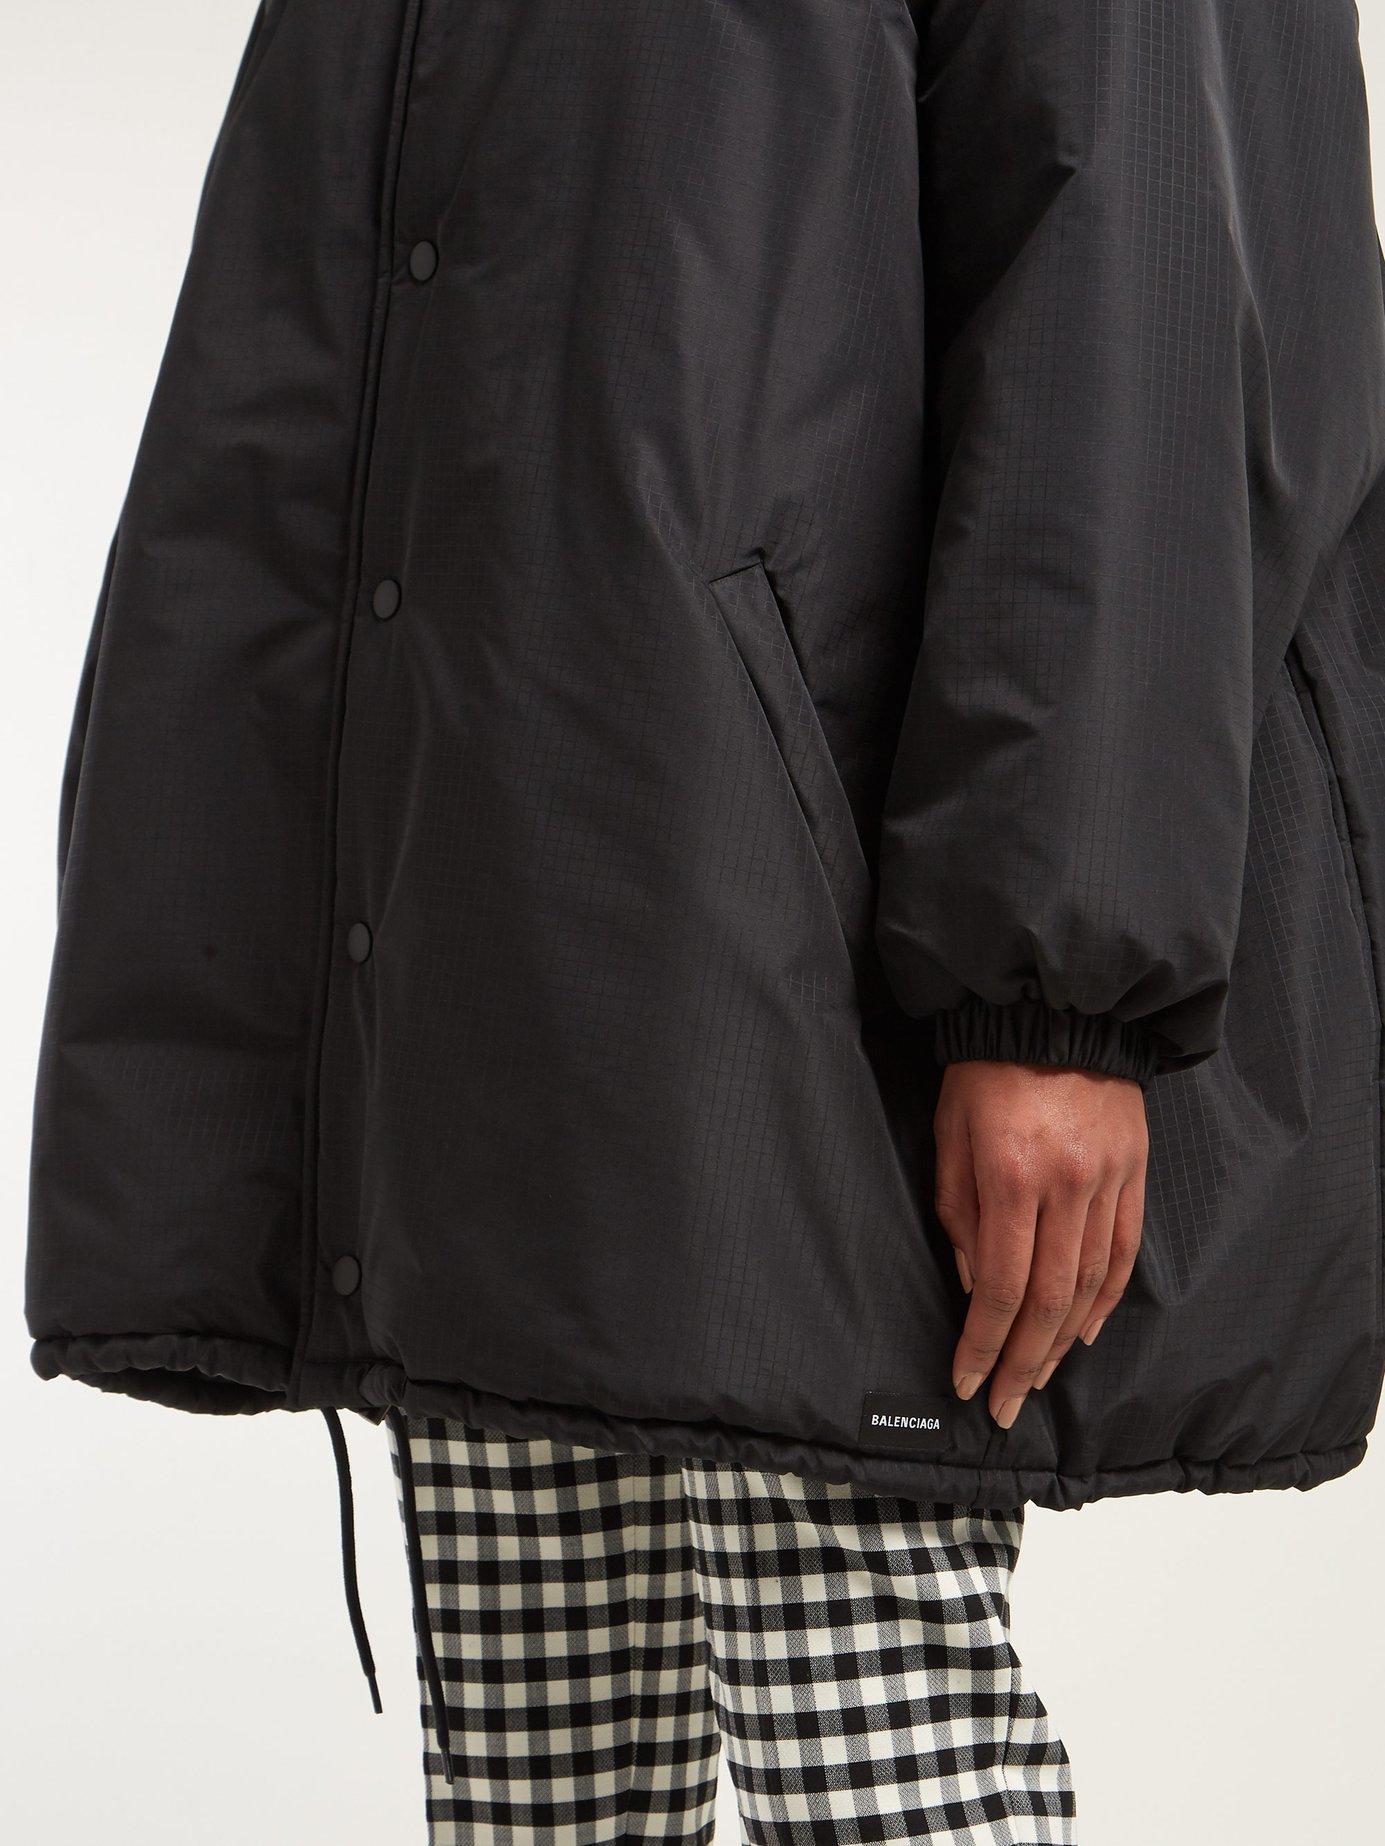 Balenciaga Synthetic Padded Cocoon Coat in Black - Lyst